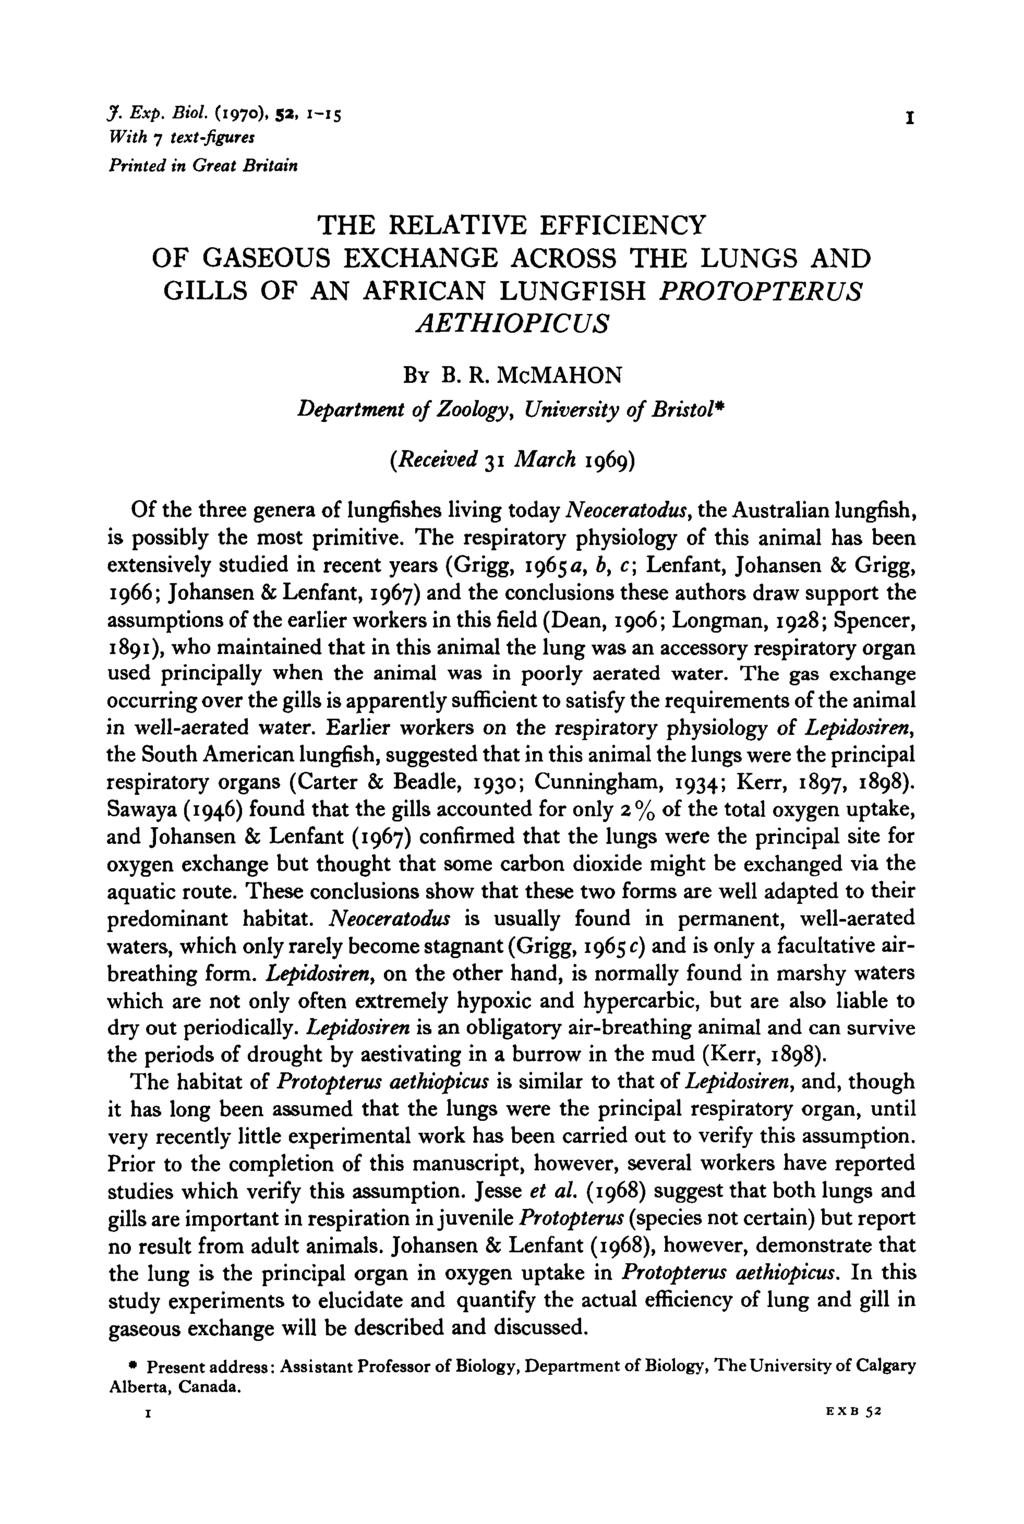 J. Exp. Biol. (1970), 5, 1-15 j With 1 text-figures Printed in Gret Britin THE RELATIVE EFFICIENCY OF GASEOUS EXCHANGE ACROSS THE LUNGS AND GILLS OF AN AFRICAN LUNGFISH PROTOPTERUS AETHIOPICUS BY B.